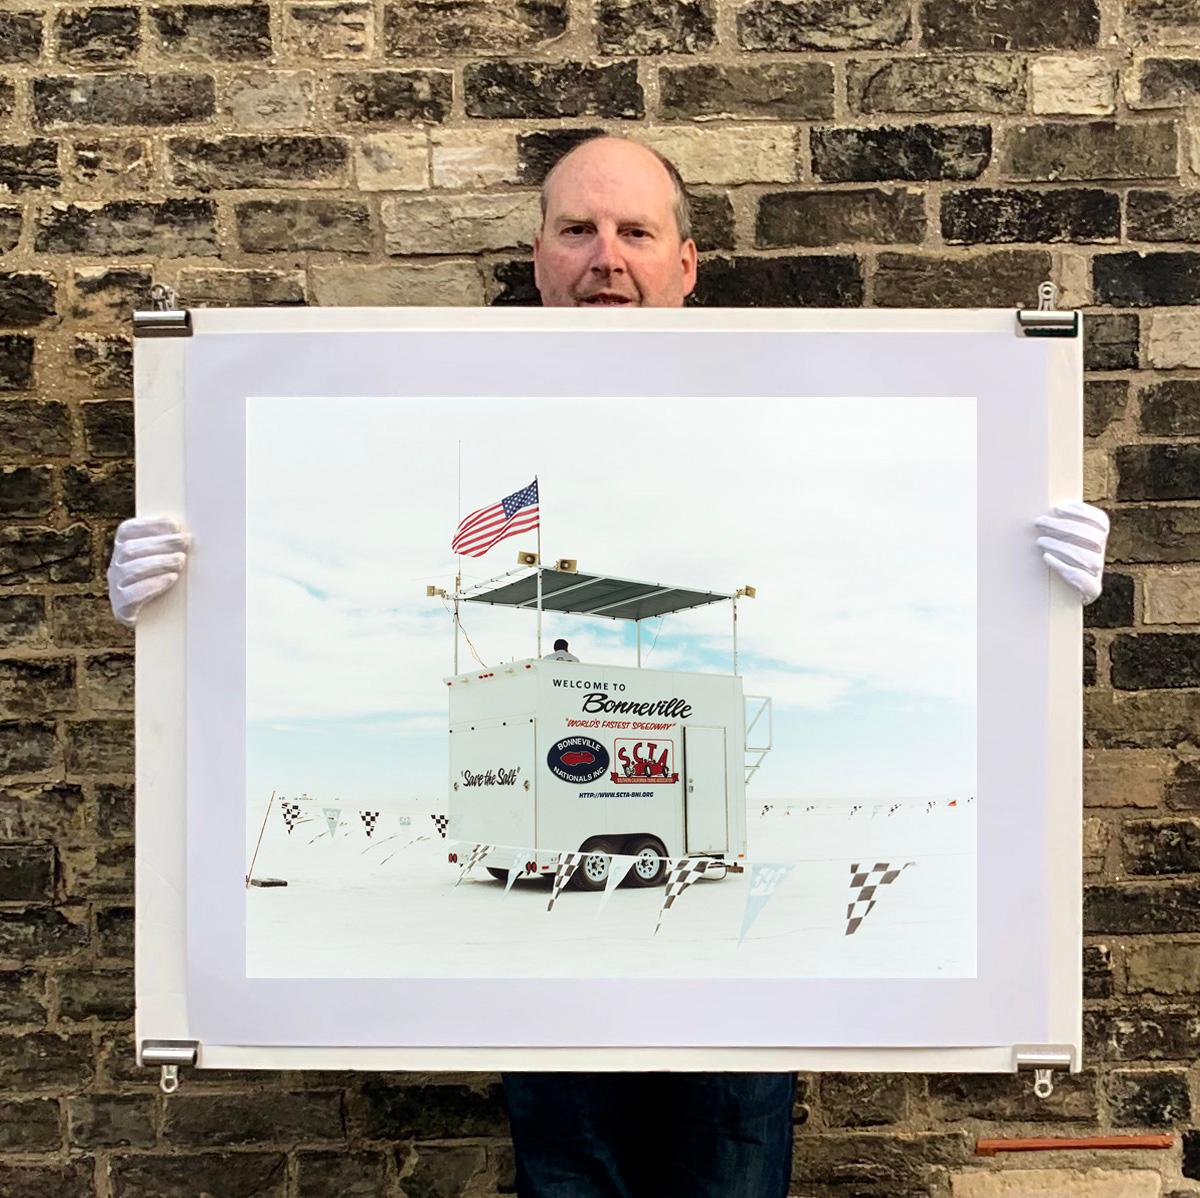 This picture instantly has a cool Americana feel. The Control Tower and the chequered flag point to the famous Bonneville Speedway home to Sir Malcolm Campbell's 'Bluebird' and Craig Breedlove's 'Spirit of America' Land Speed Records and in 2005 it